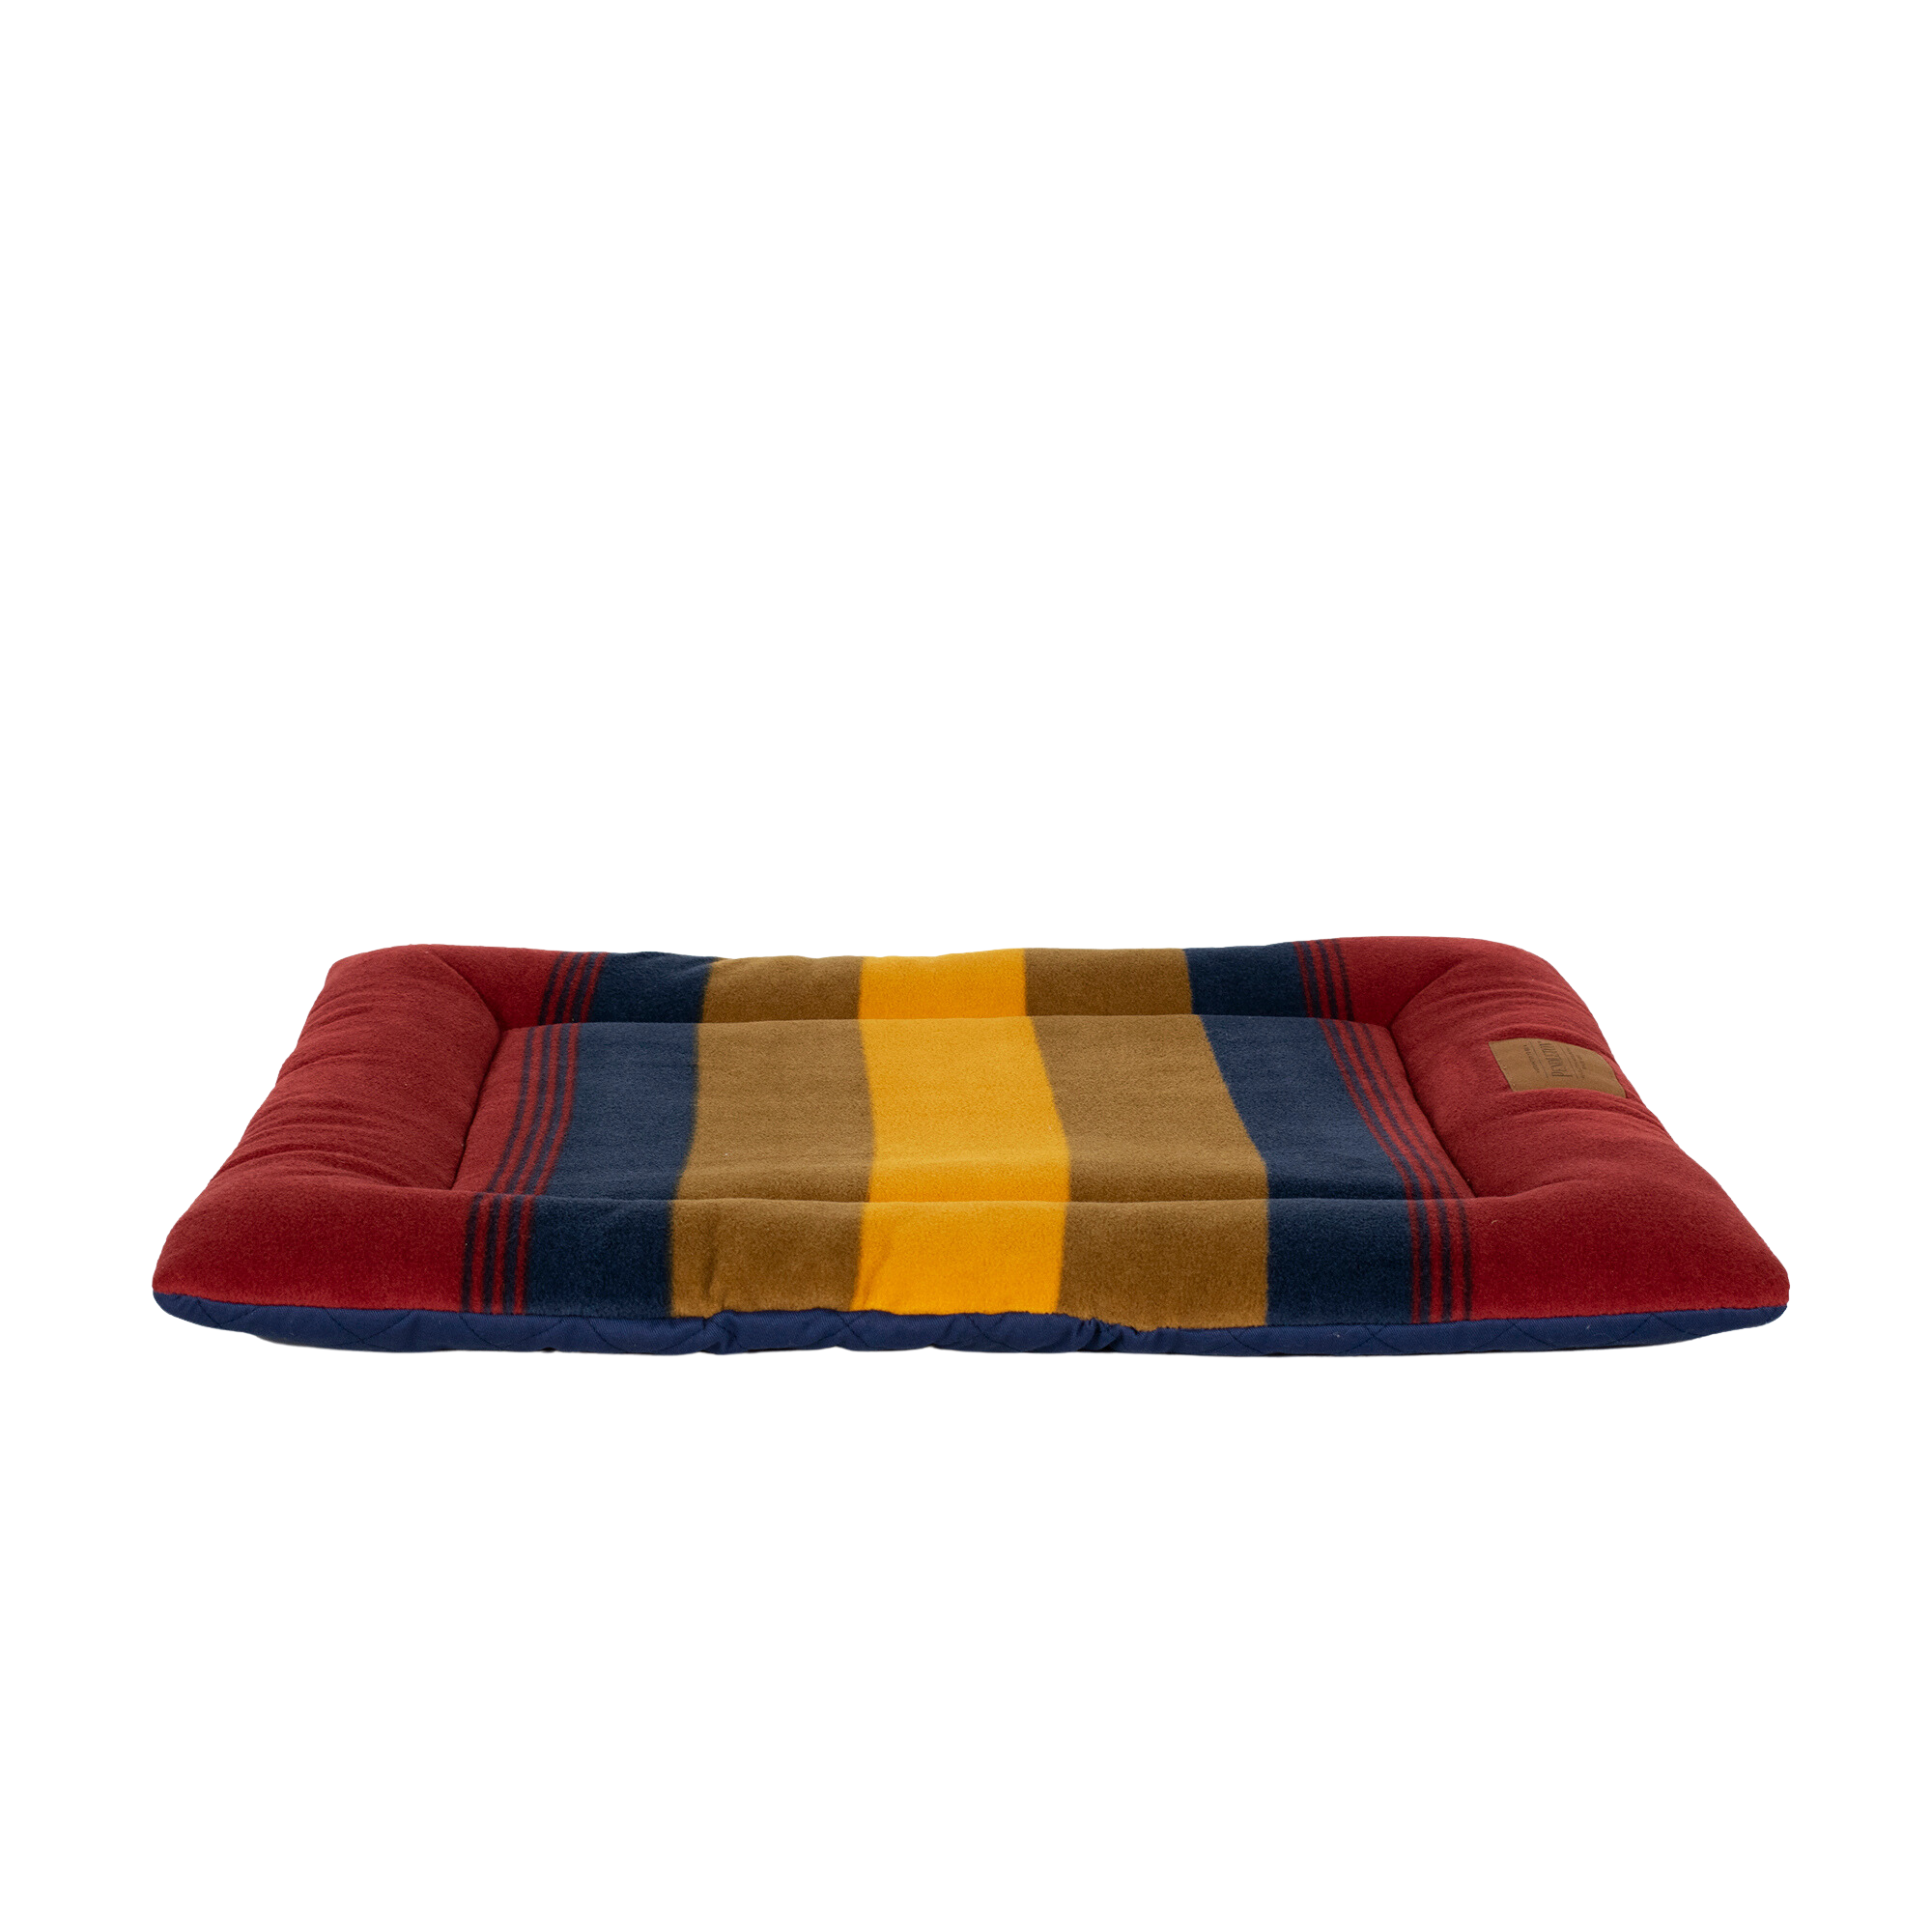 PENDLETON-DOG-BED-KENNEL-MAT-CRATE-RED-YELLOW-BLUE-ZION-NATIONAL-PARK